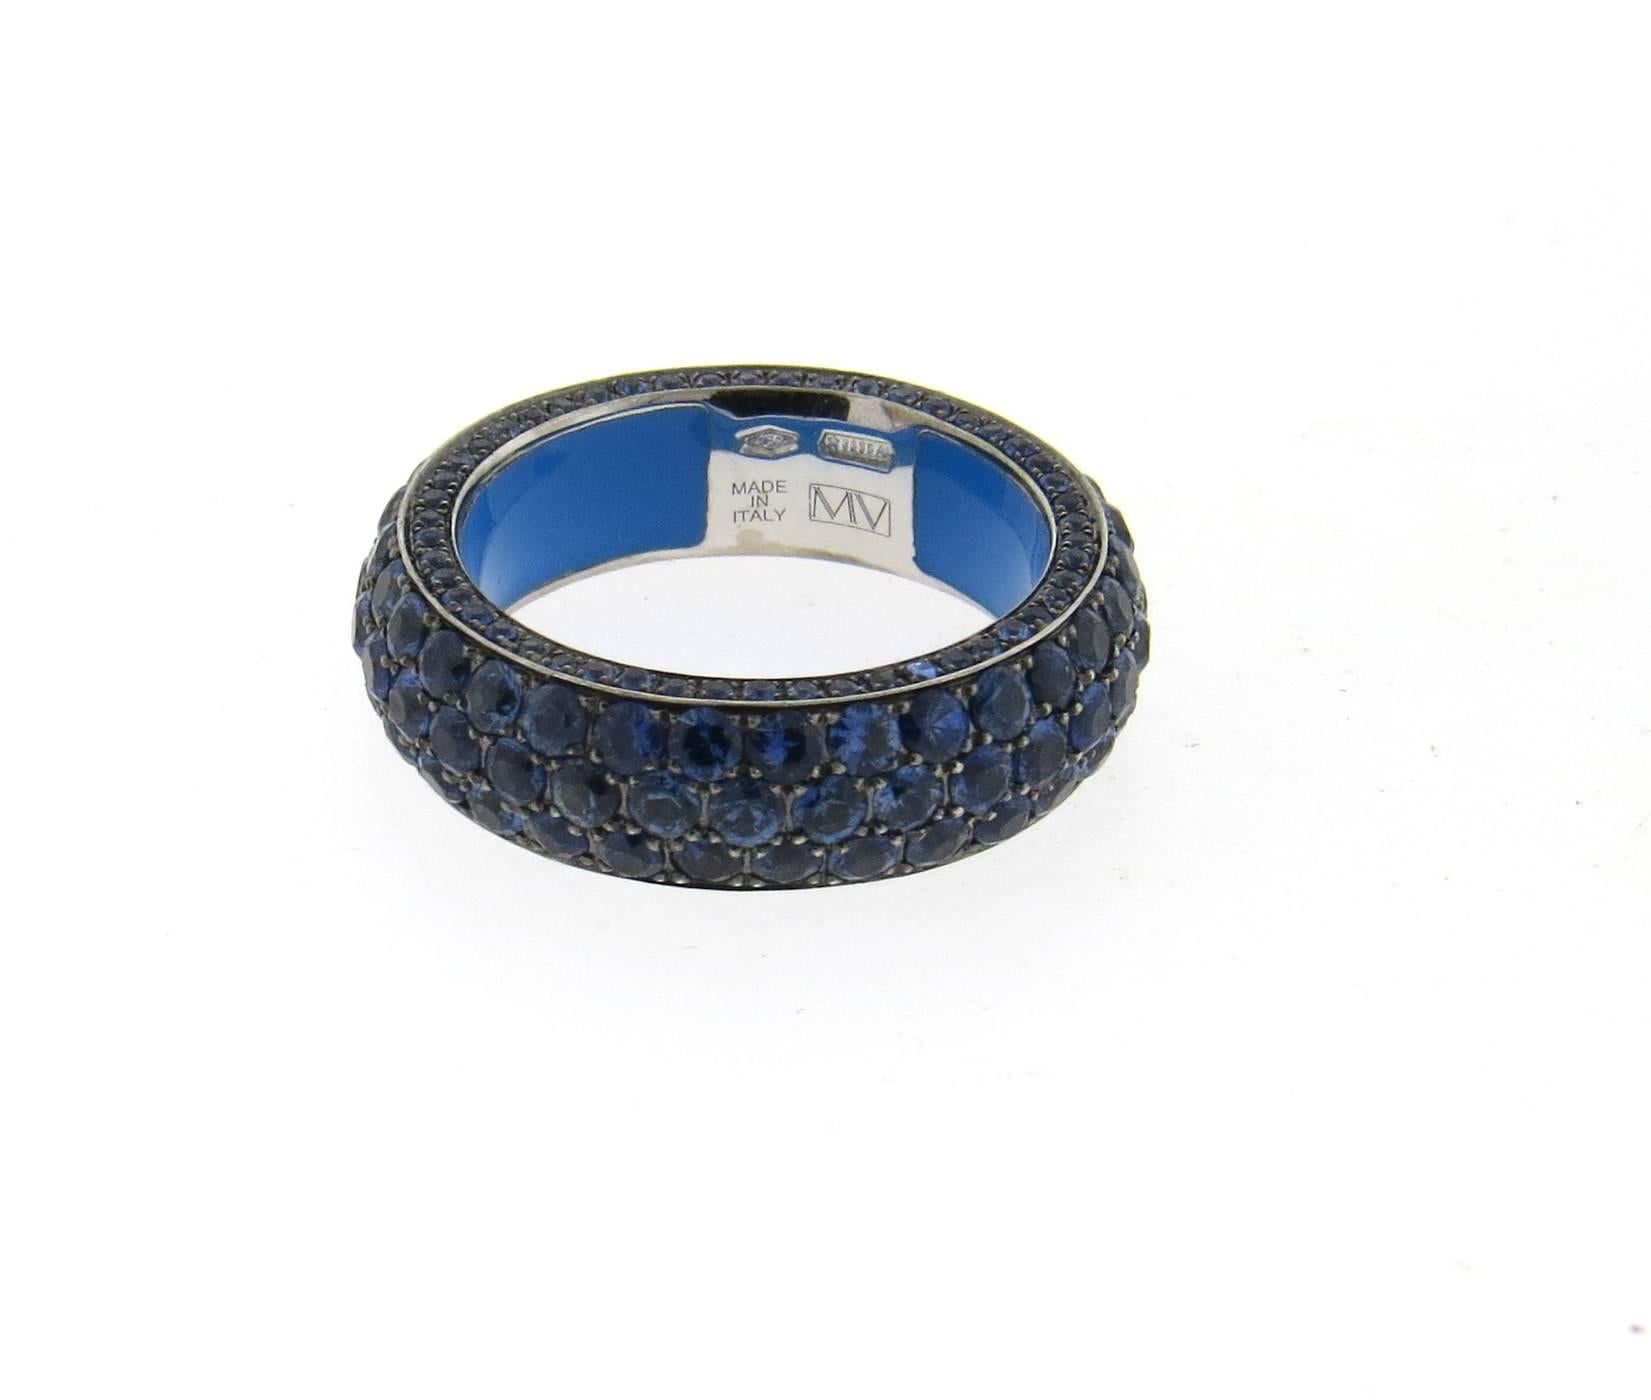 An 18k gold band ring, crafted by Marco Valente, set with all around 5.27ctw blue sapphire gemstones. Ring size 7, ring is 6.5mm wide and weighs 10.2 grams
Retail $6270